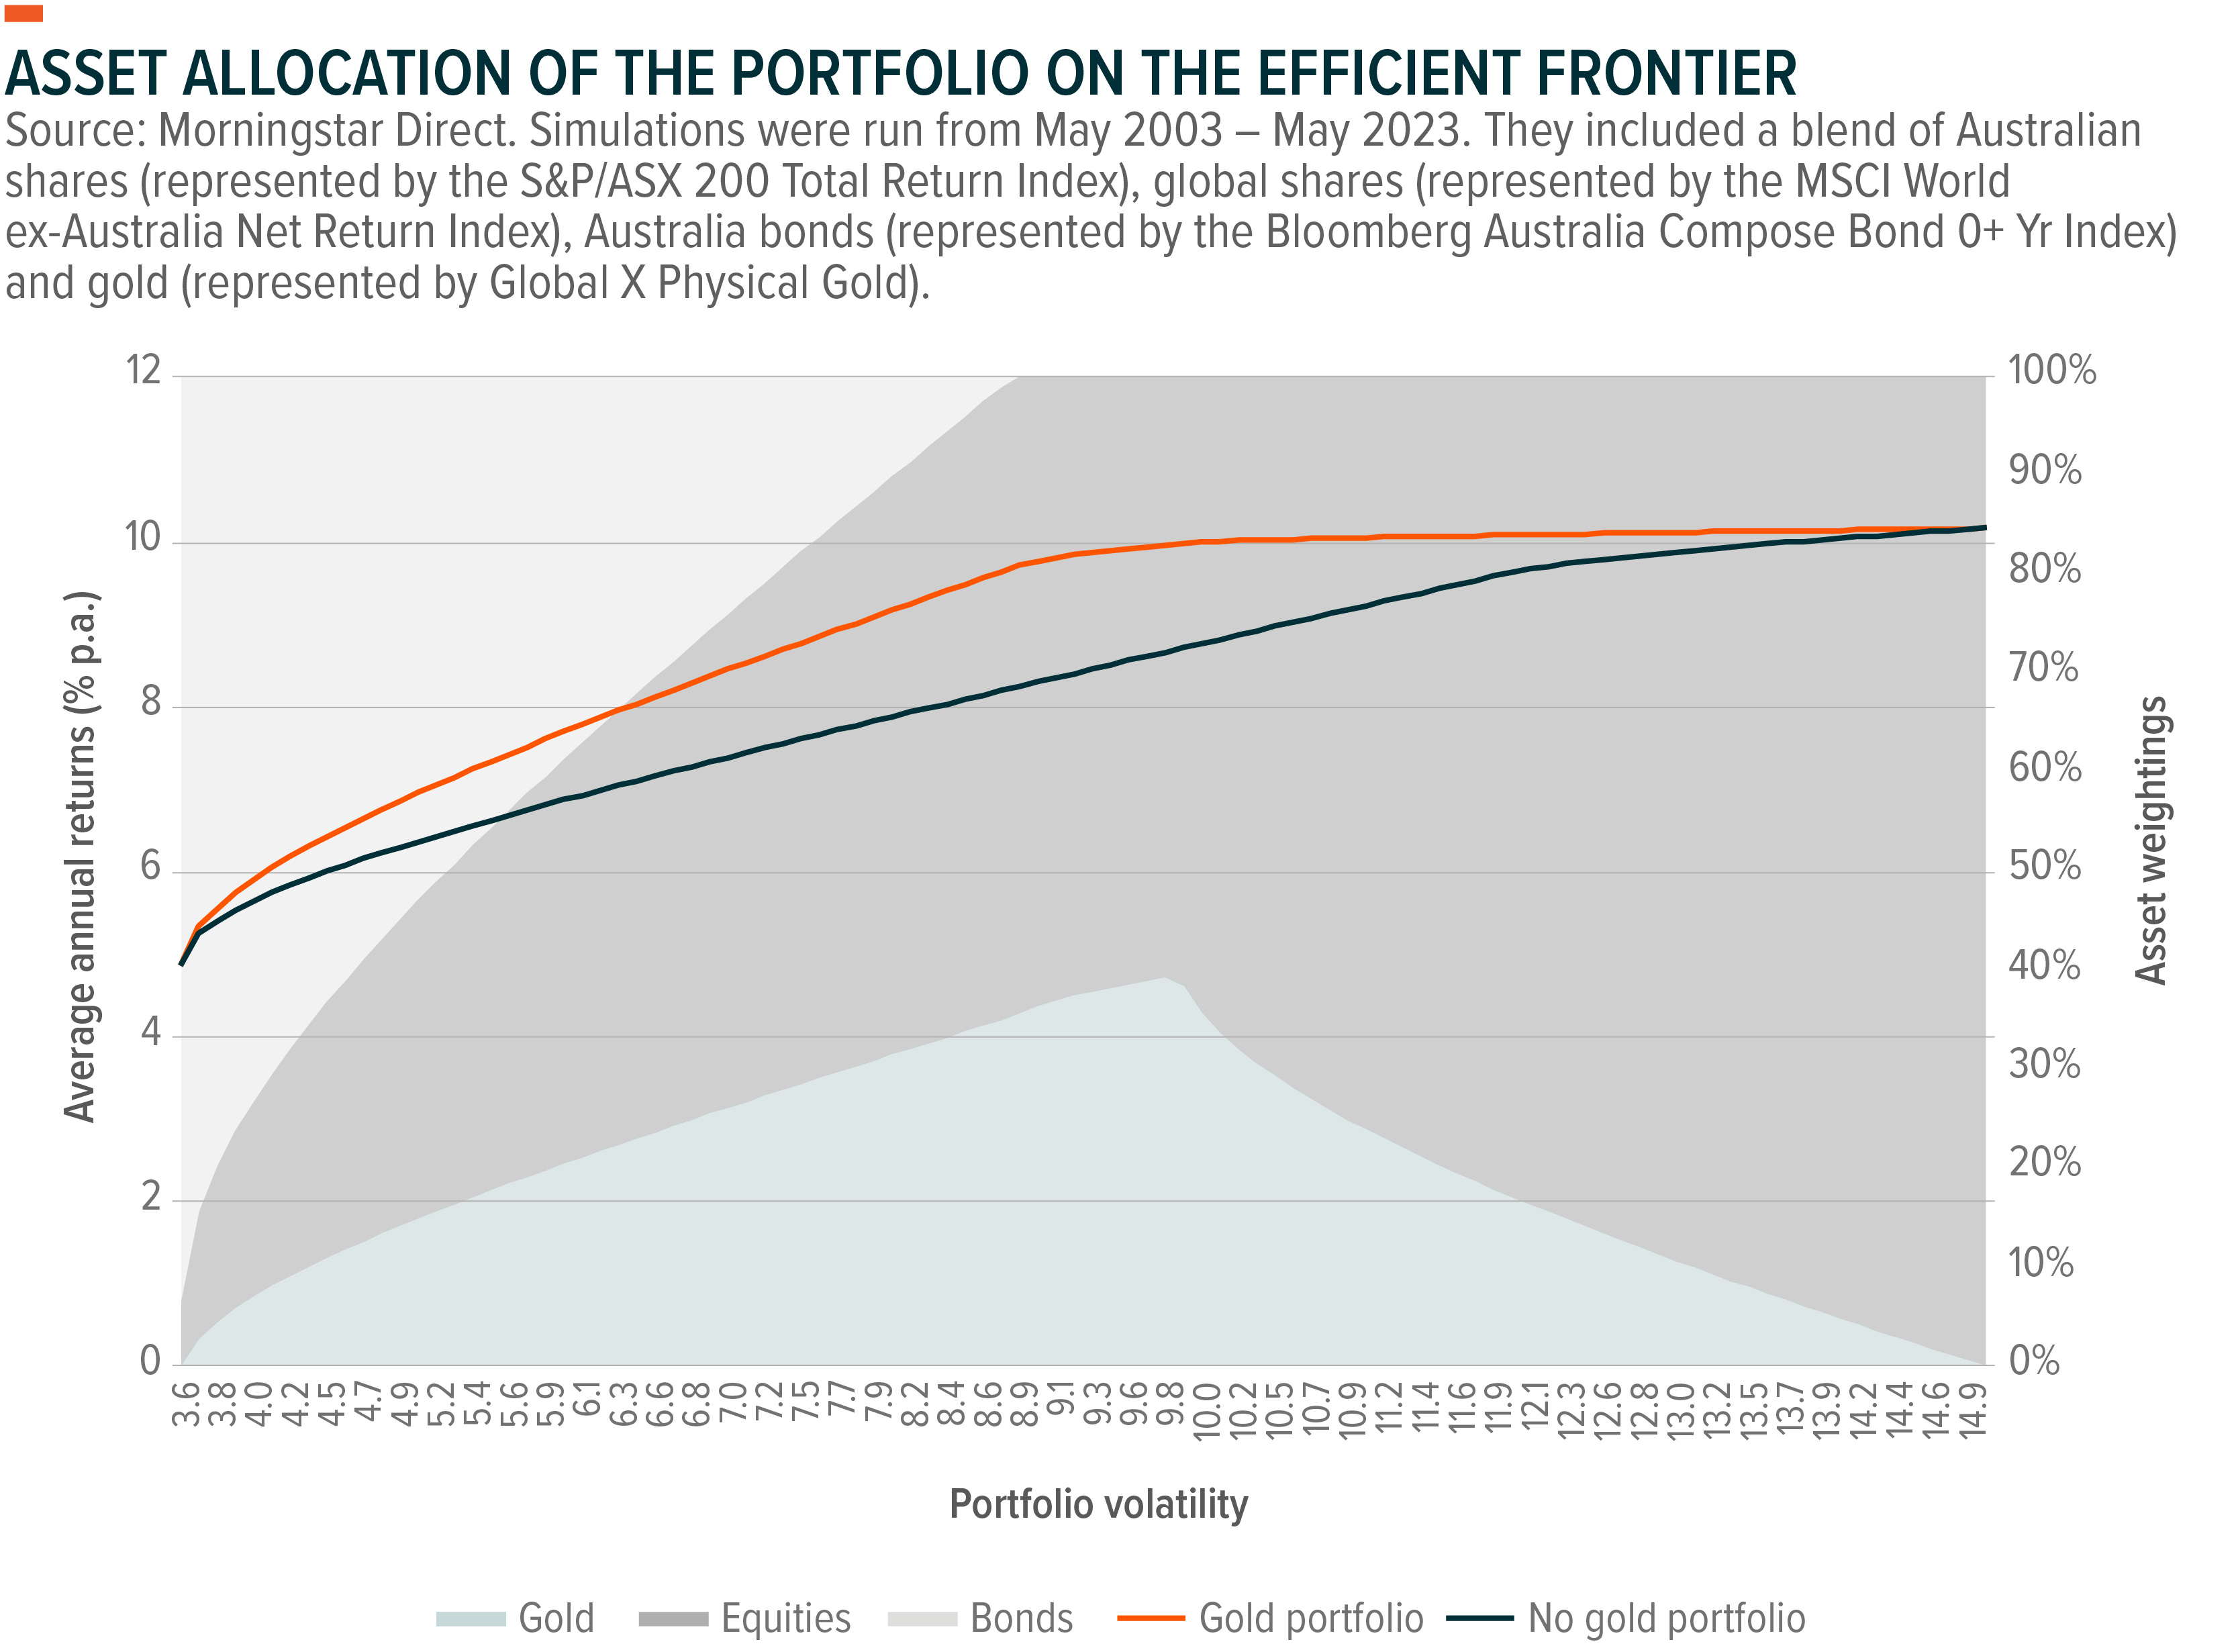 Asset Allocation of the Portfolio on the Efficient Frontier